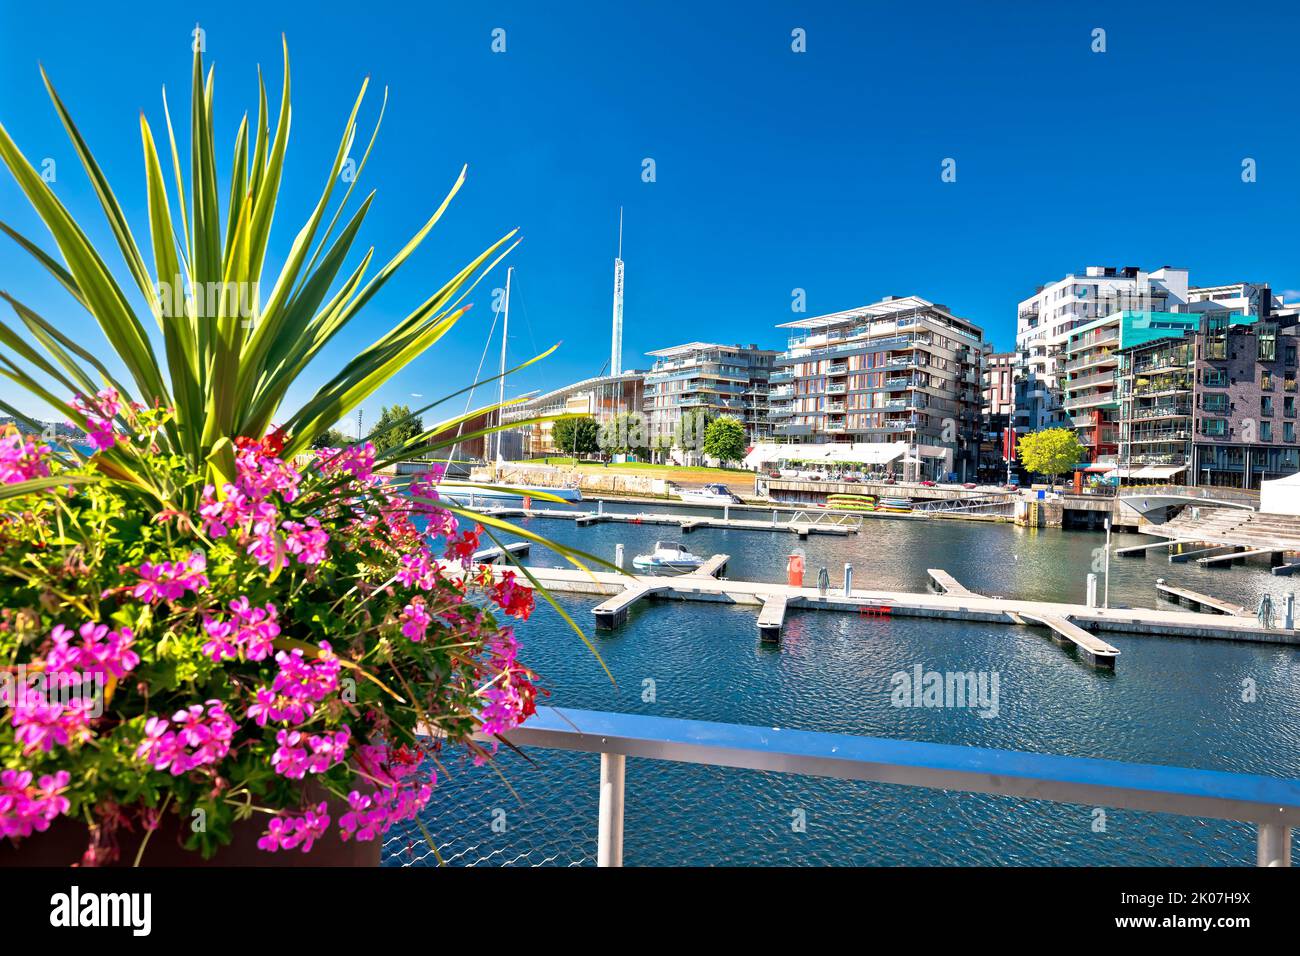 Scenic Aker Brygge marina nad modern waterfront architecture in Oslo view, capital city of Norway Stock Photo